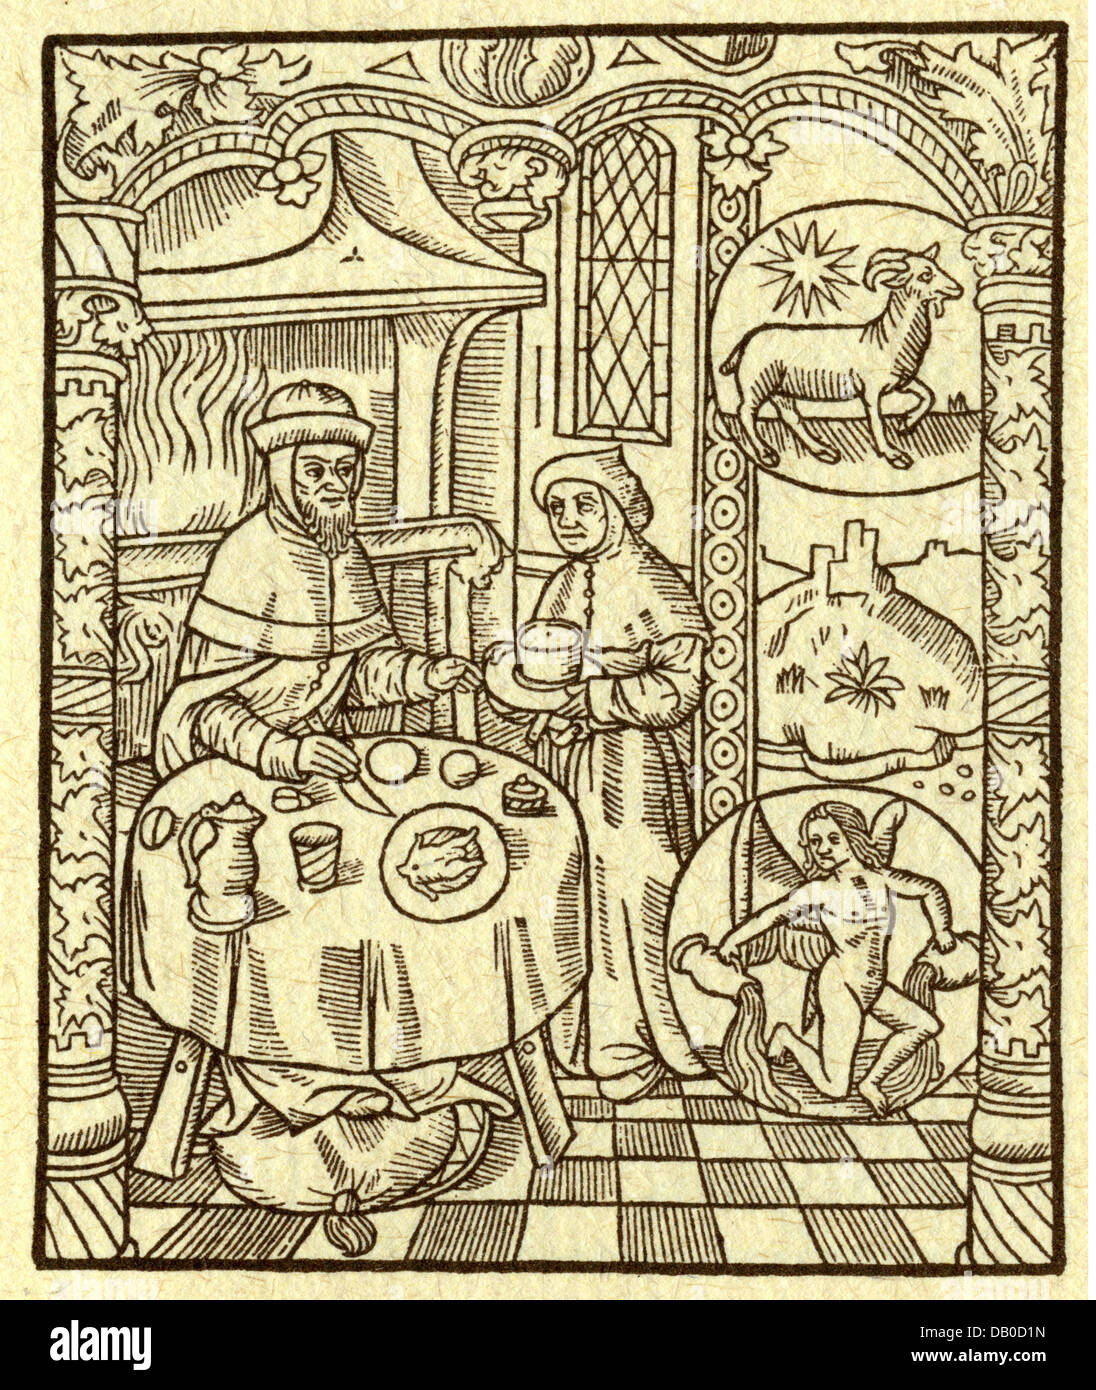 calendarium / calendars, labours of the months, January, woodcut, France, 15th century, Capricorn, Aquarius, sign, zodiac, month image, months, people, Middle Ages, winter, wintertime, wintertide, eating, eat, fireplace, fireplaces, table, tables, historic, historical, medieval, Additional-Rights-Clearences-Not Available Stock Photo